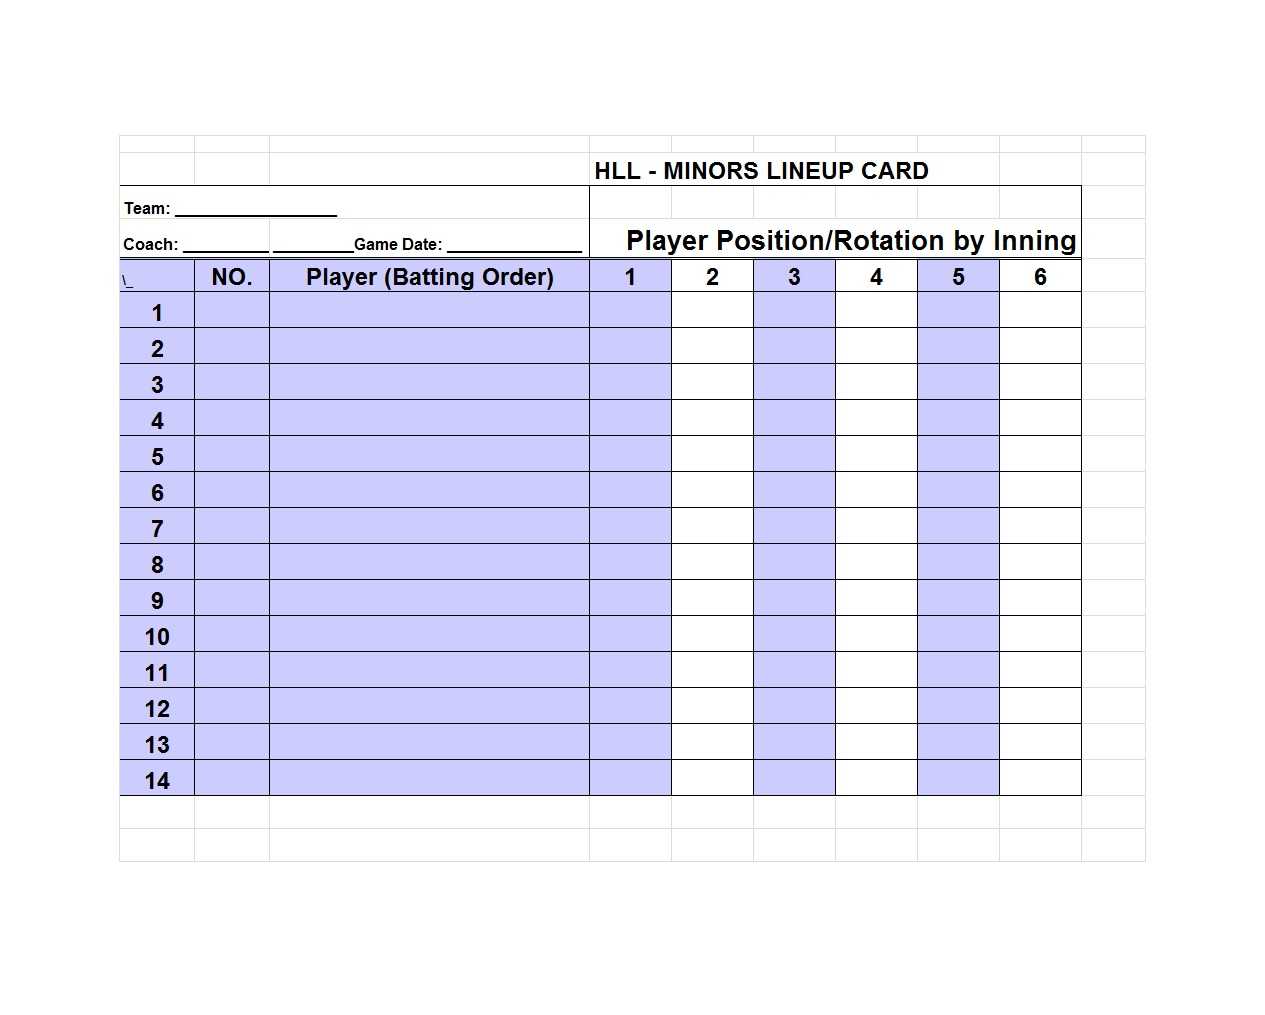 33 Printable Baseball Lineup Templates [Free Download] ᐅ With Regard To Dugout Lineup Card Template